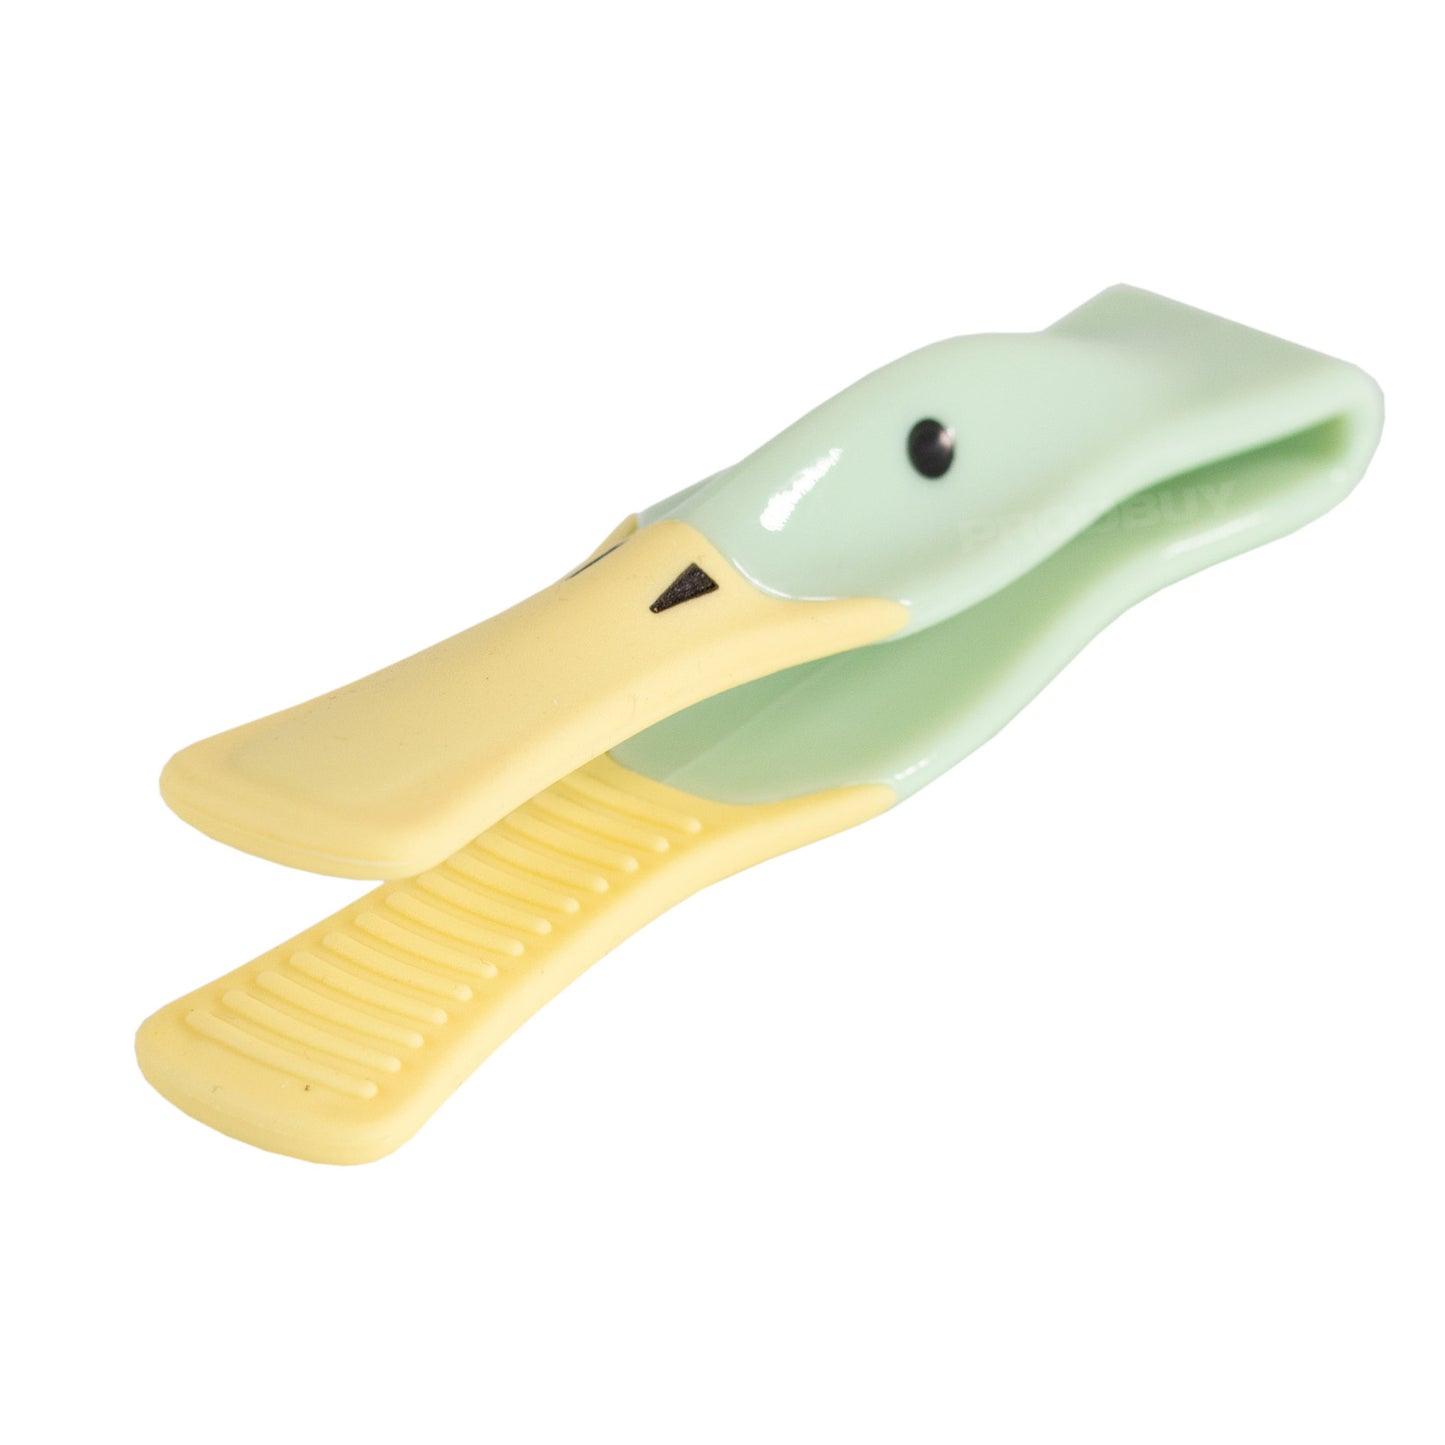 Zeal Silicone Tip Duck Shaped Toast Kitchen Tongs